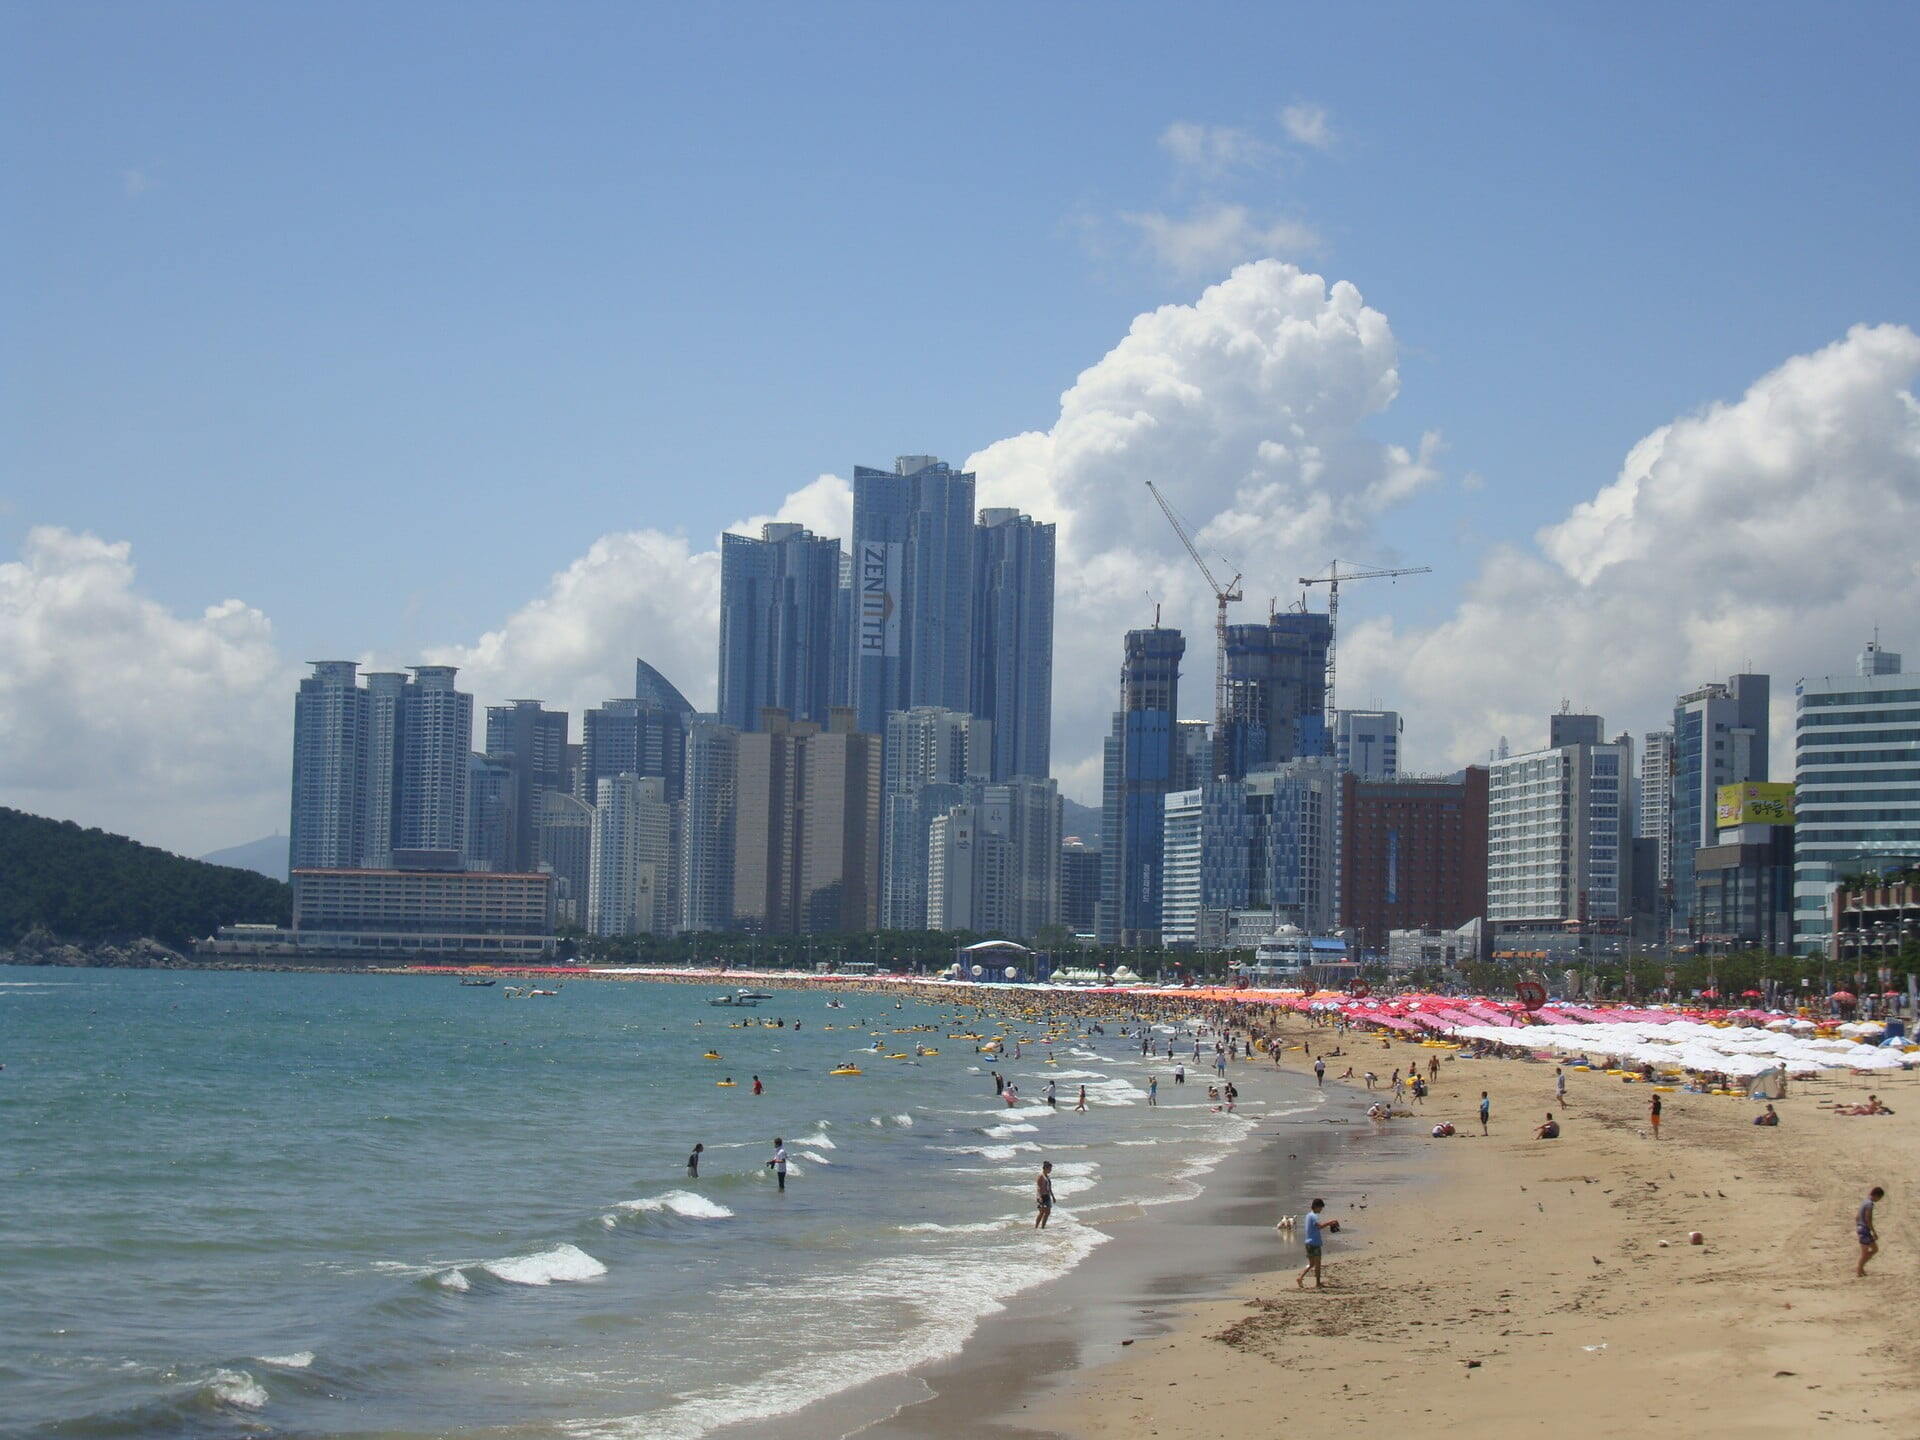 Pusan - Afternoon in Haeundae Beach, Busan, South Korea. Photograph from Flickr; author Jens-Olaf Walter; license of cc-by-2.0.